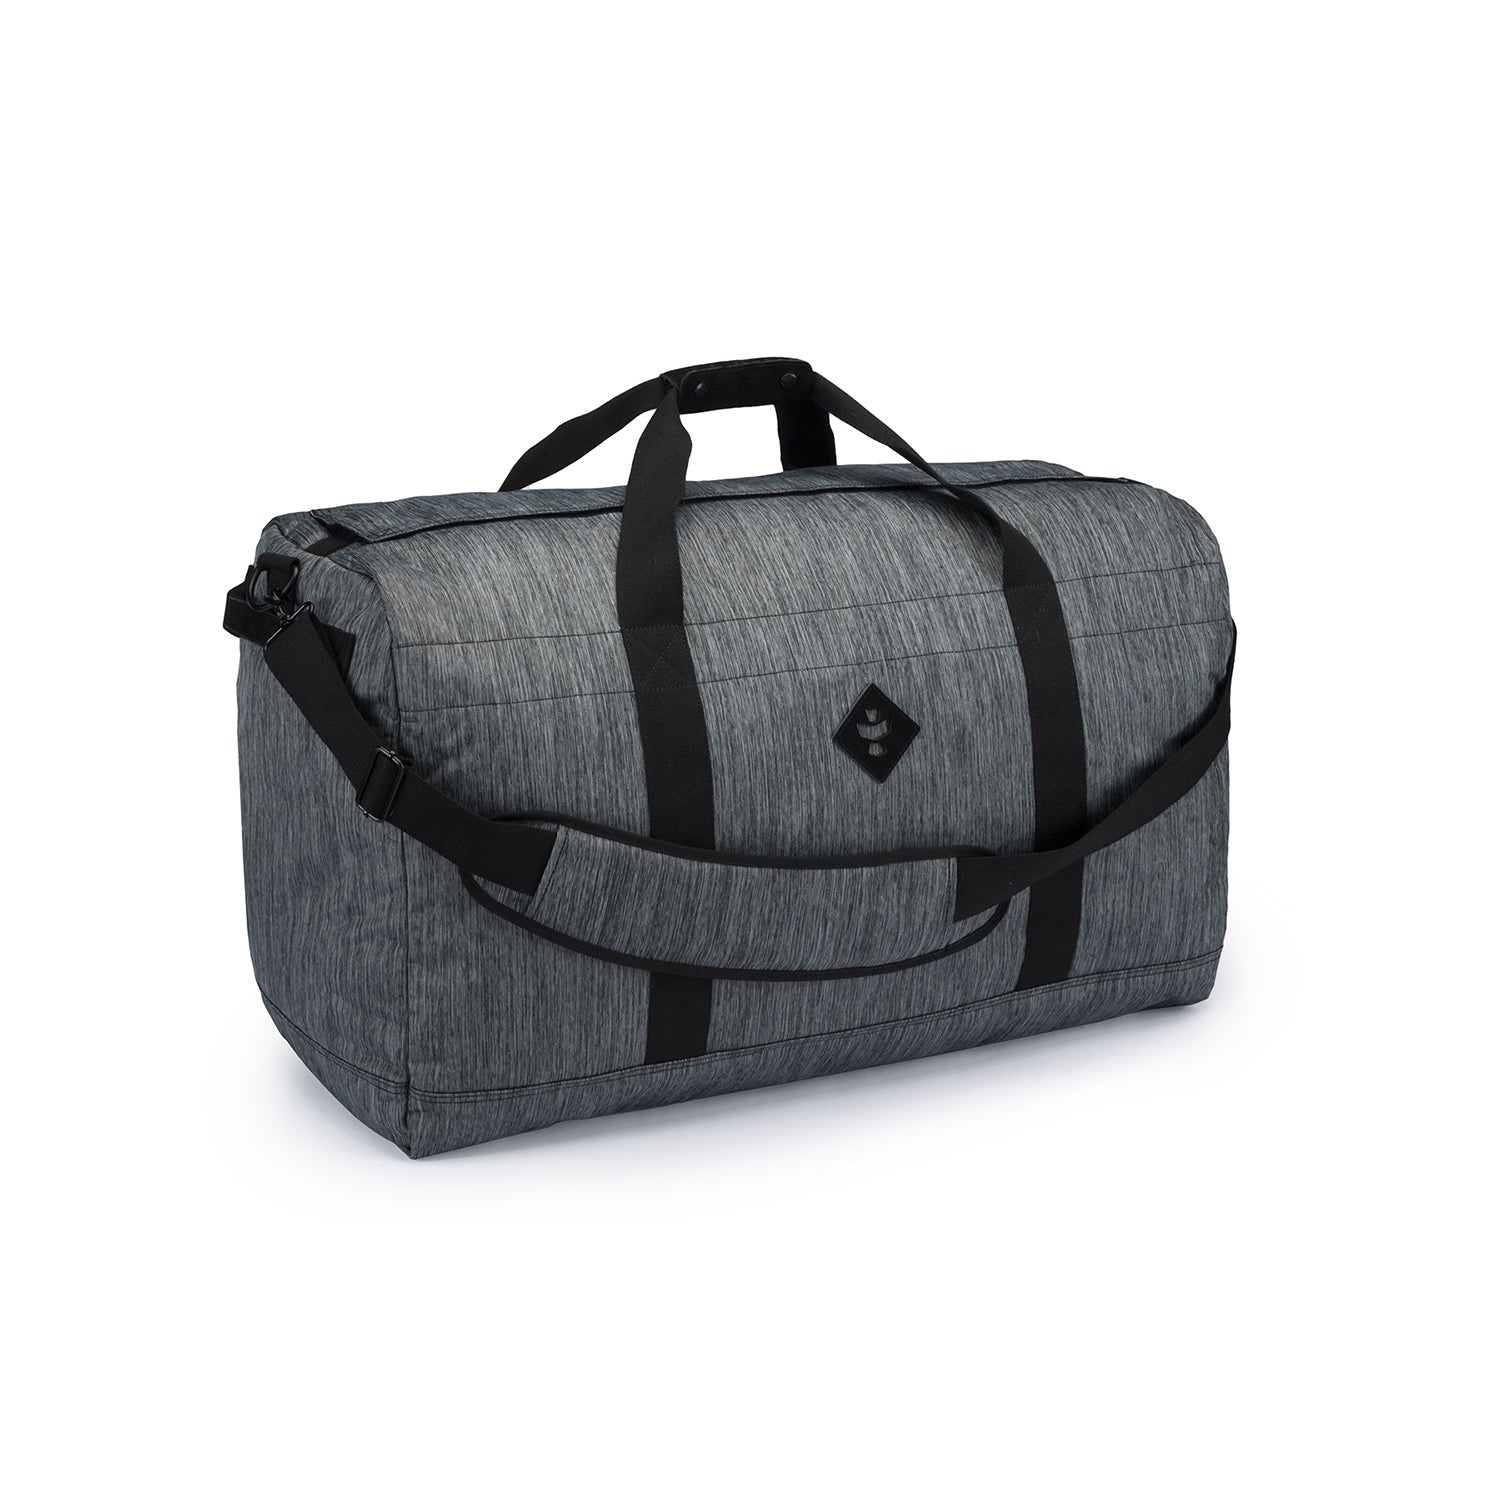 The Continental - Smell Proof Large Duffle